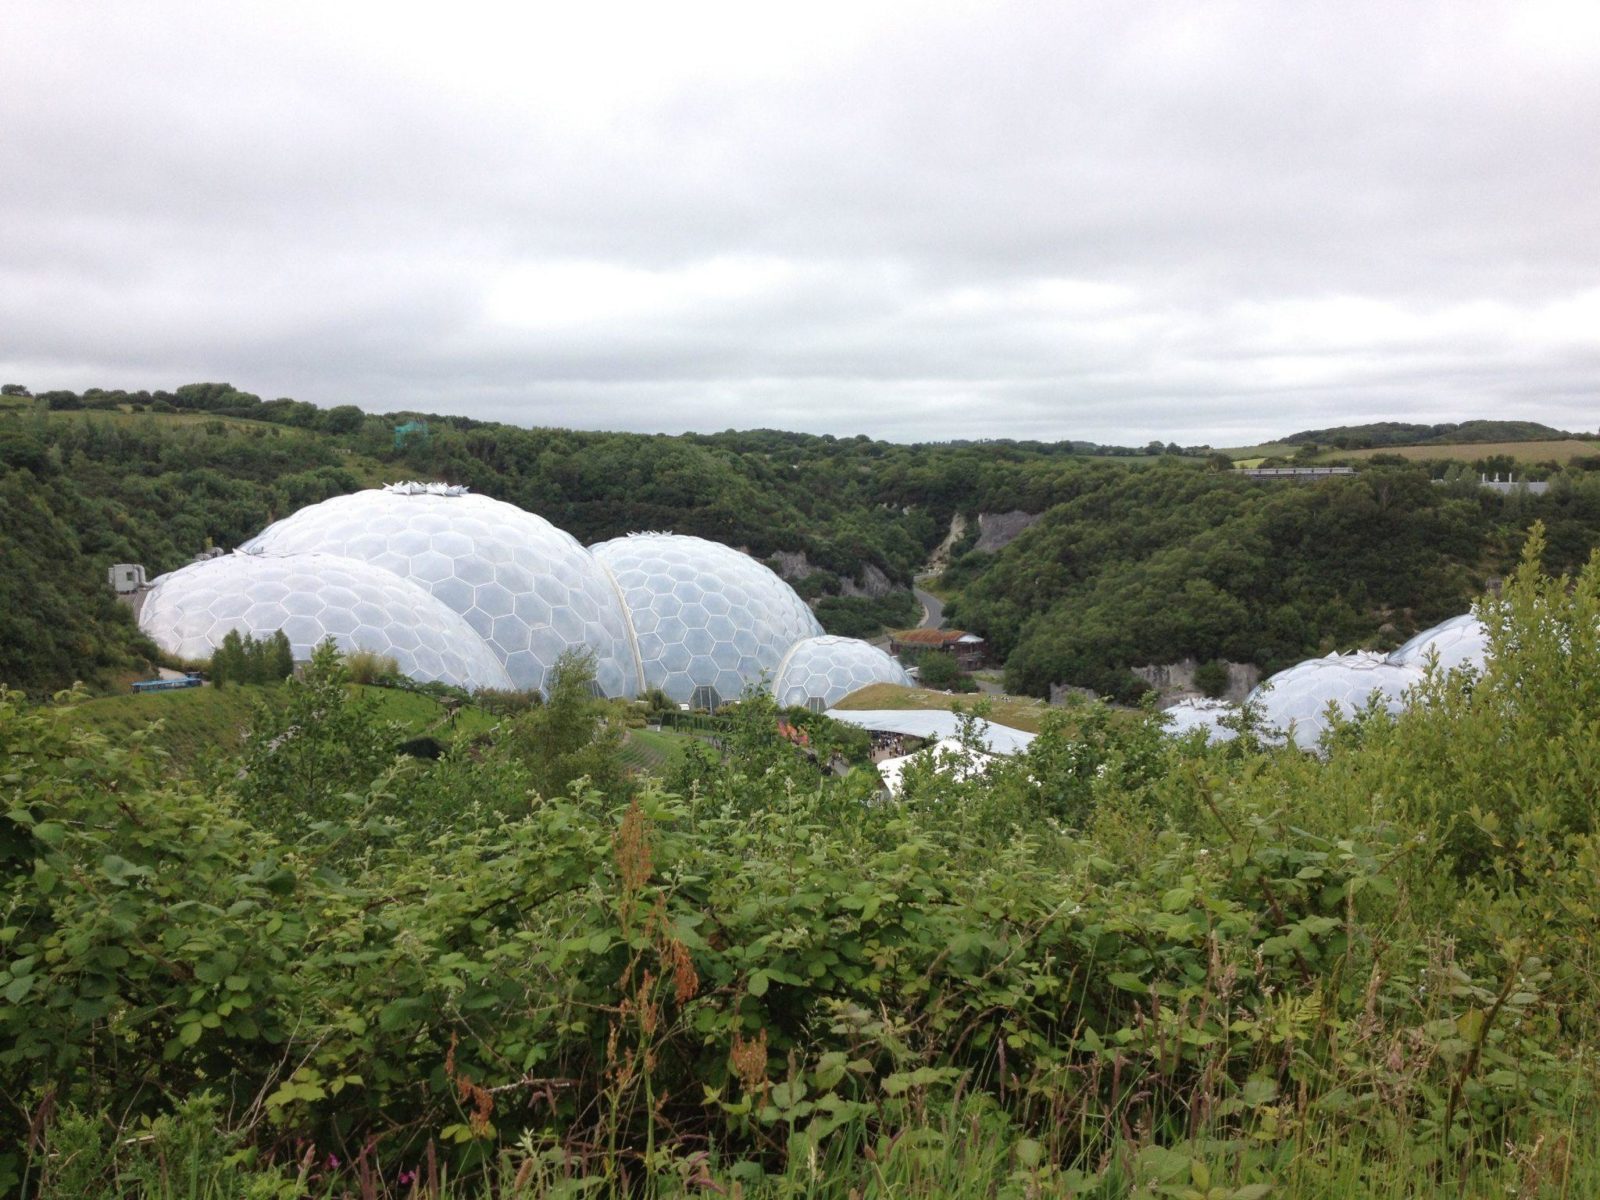         Things to do in Cornwall: Explore the enchanting Eden Domes in England.